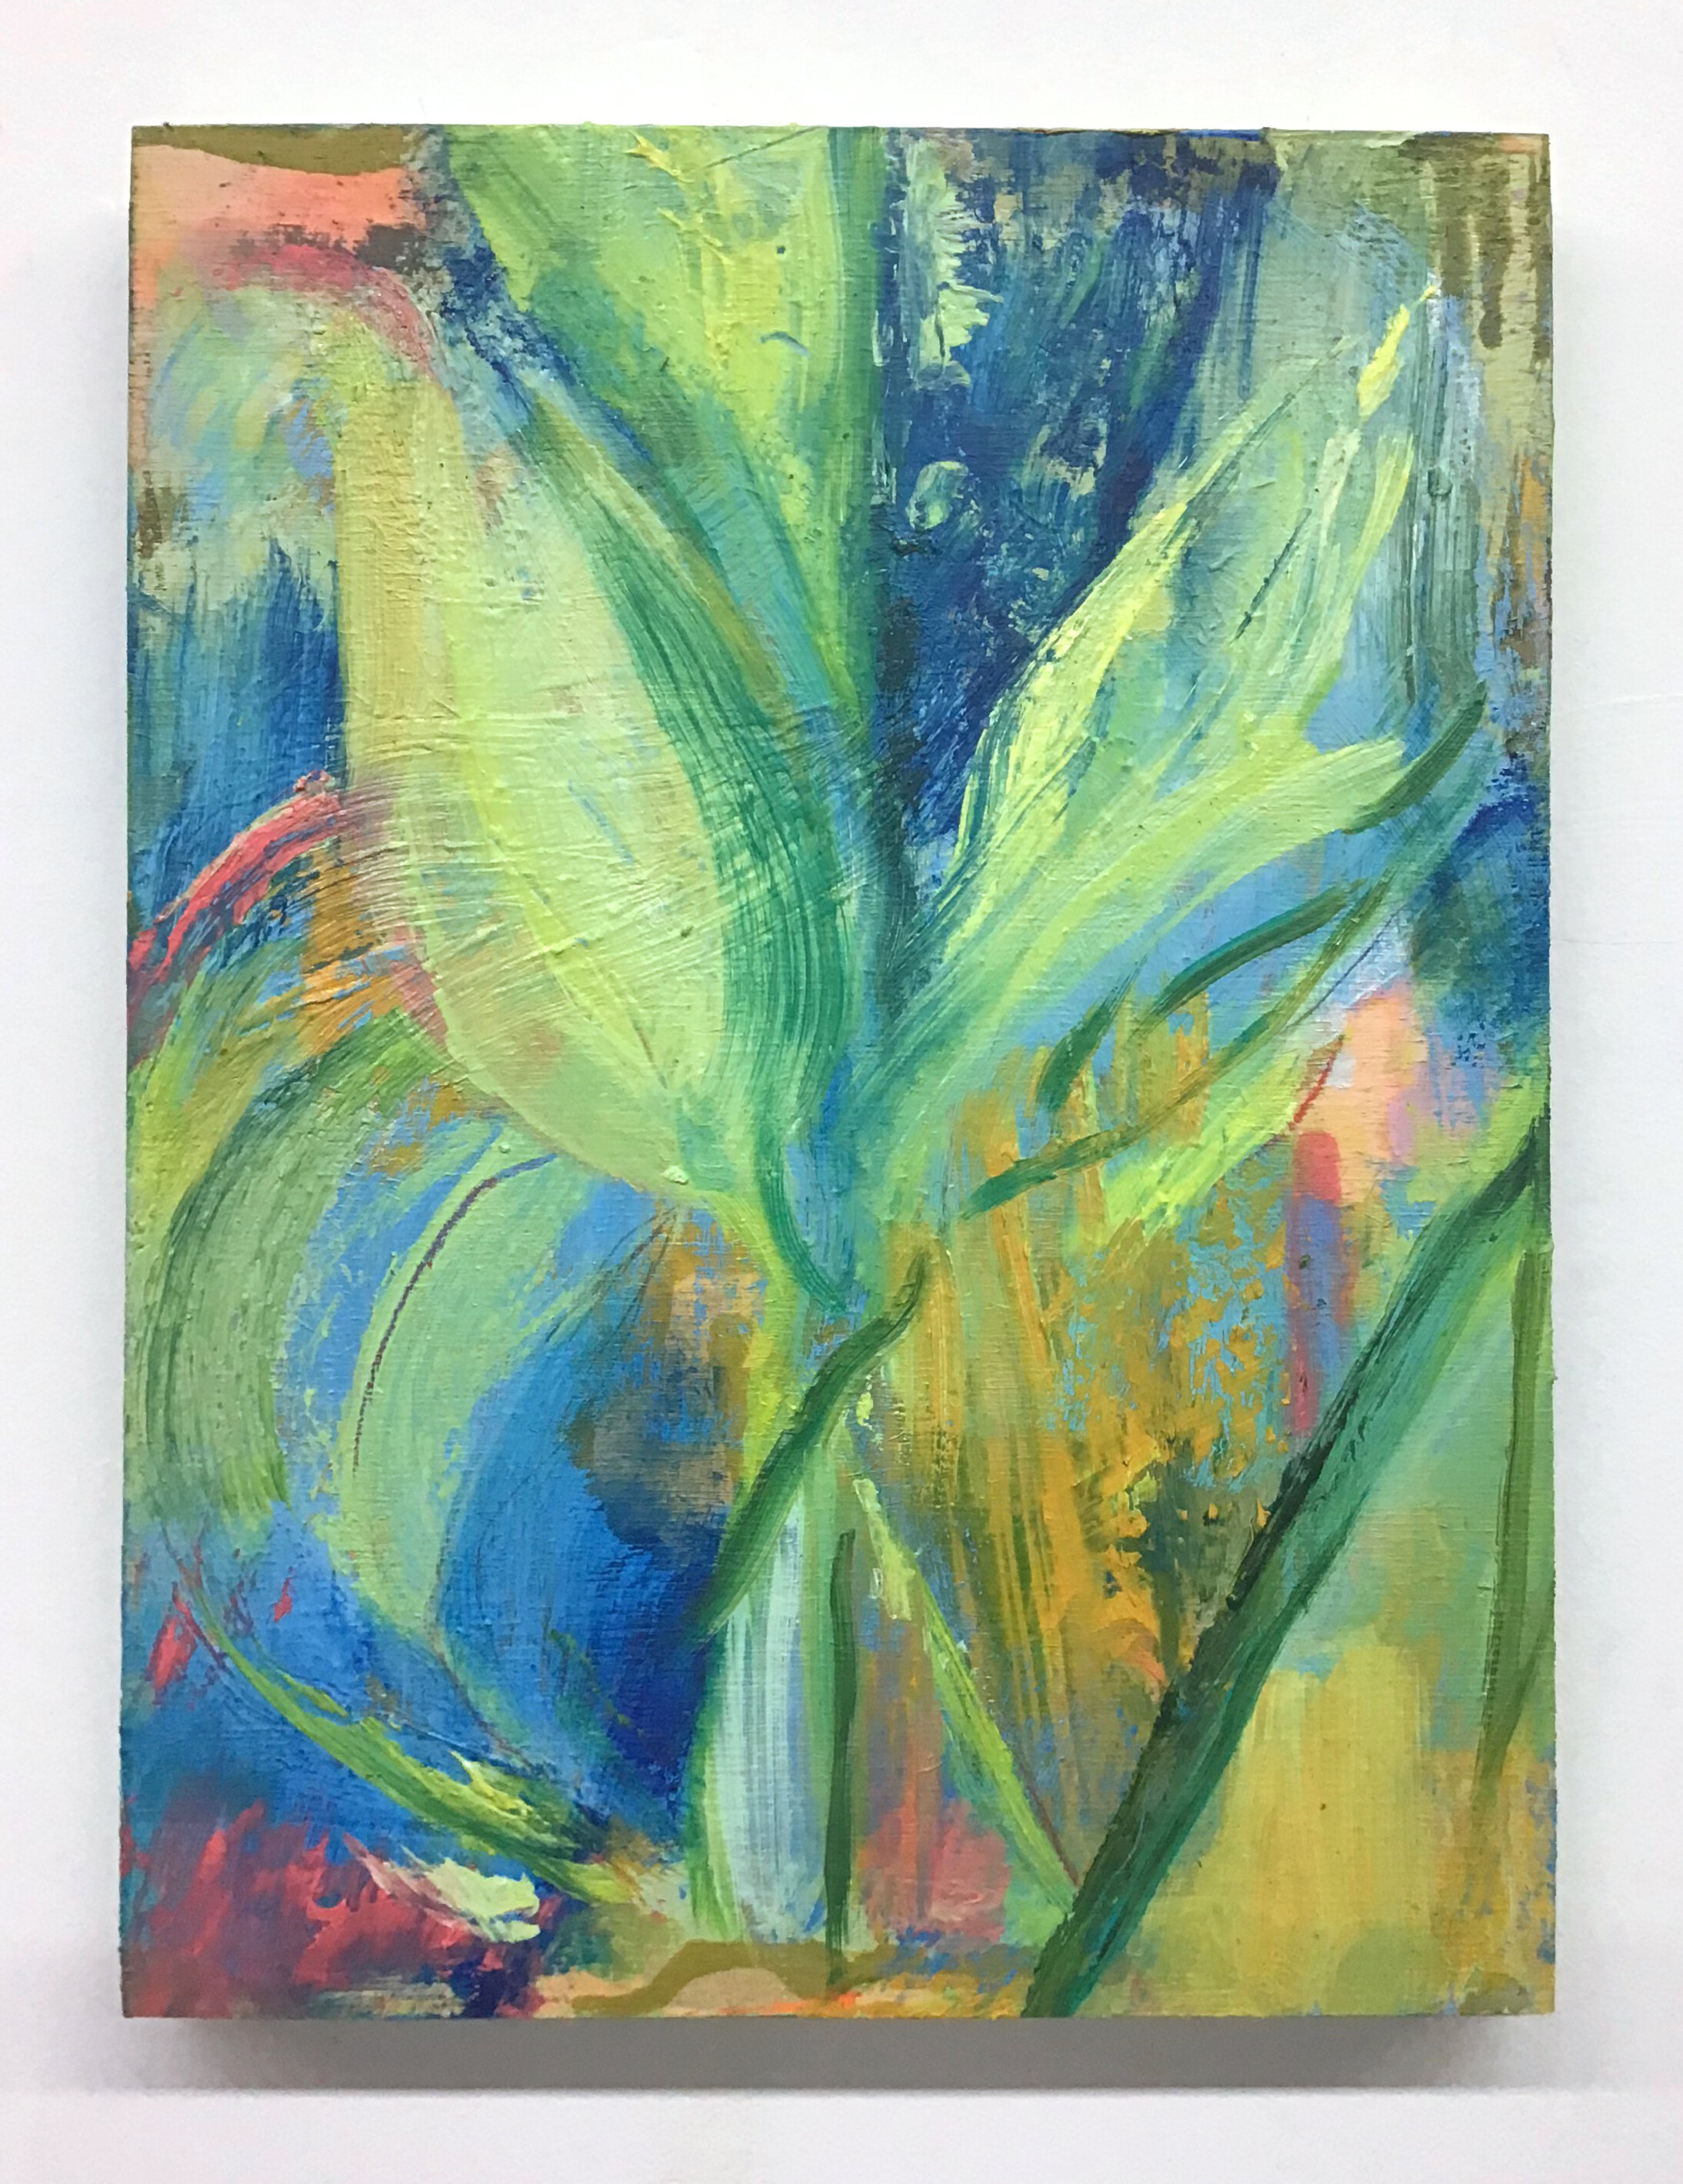    Lily      — SOLD                                                                                                                                      12 x 9.5”                                                                                        